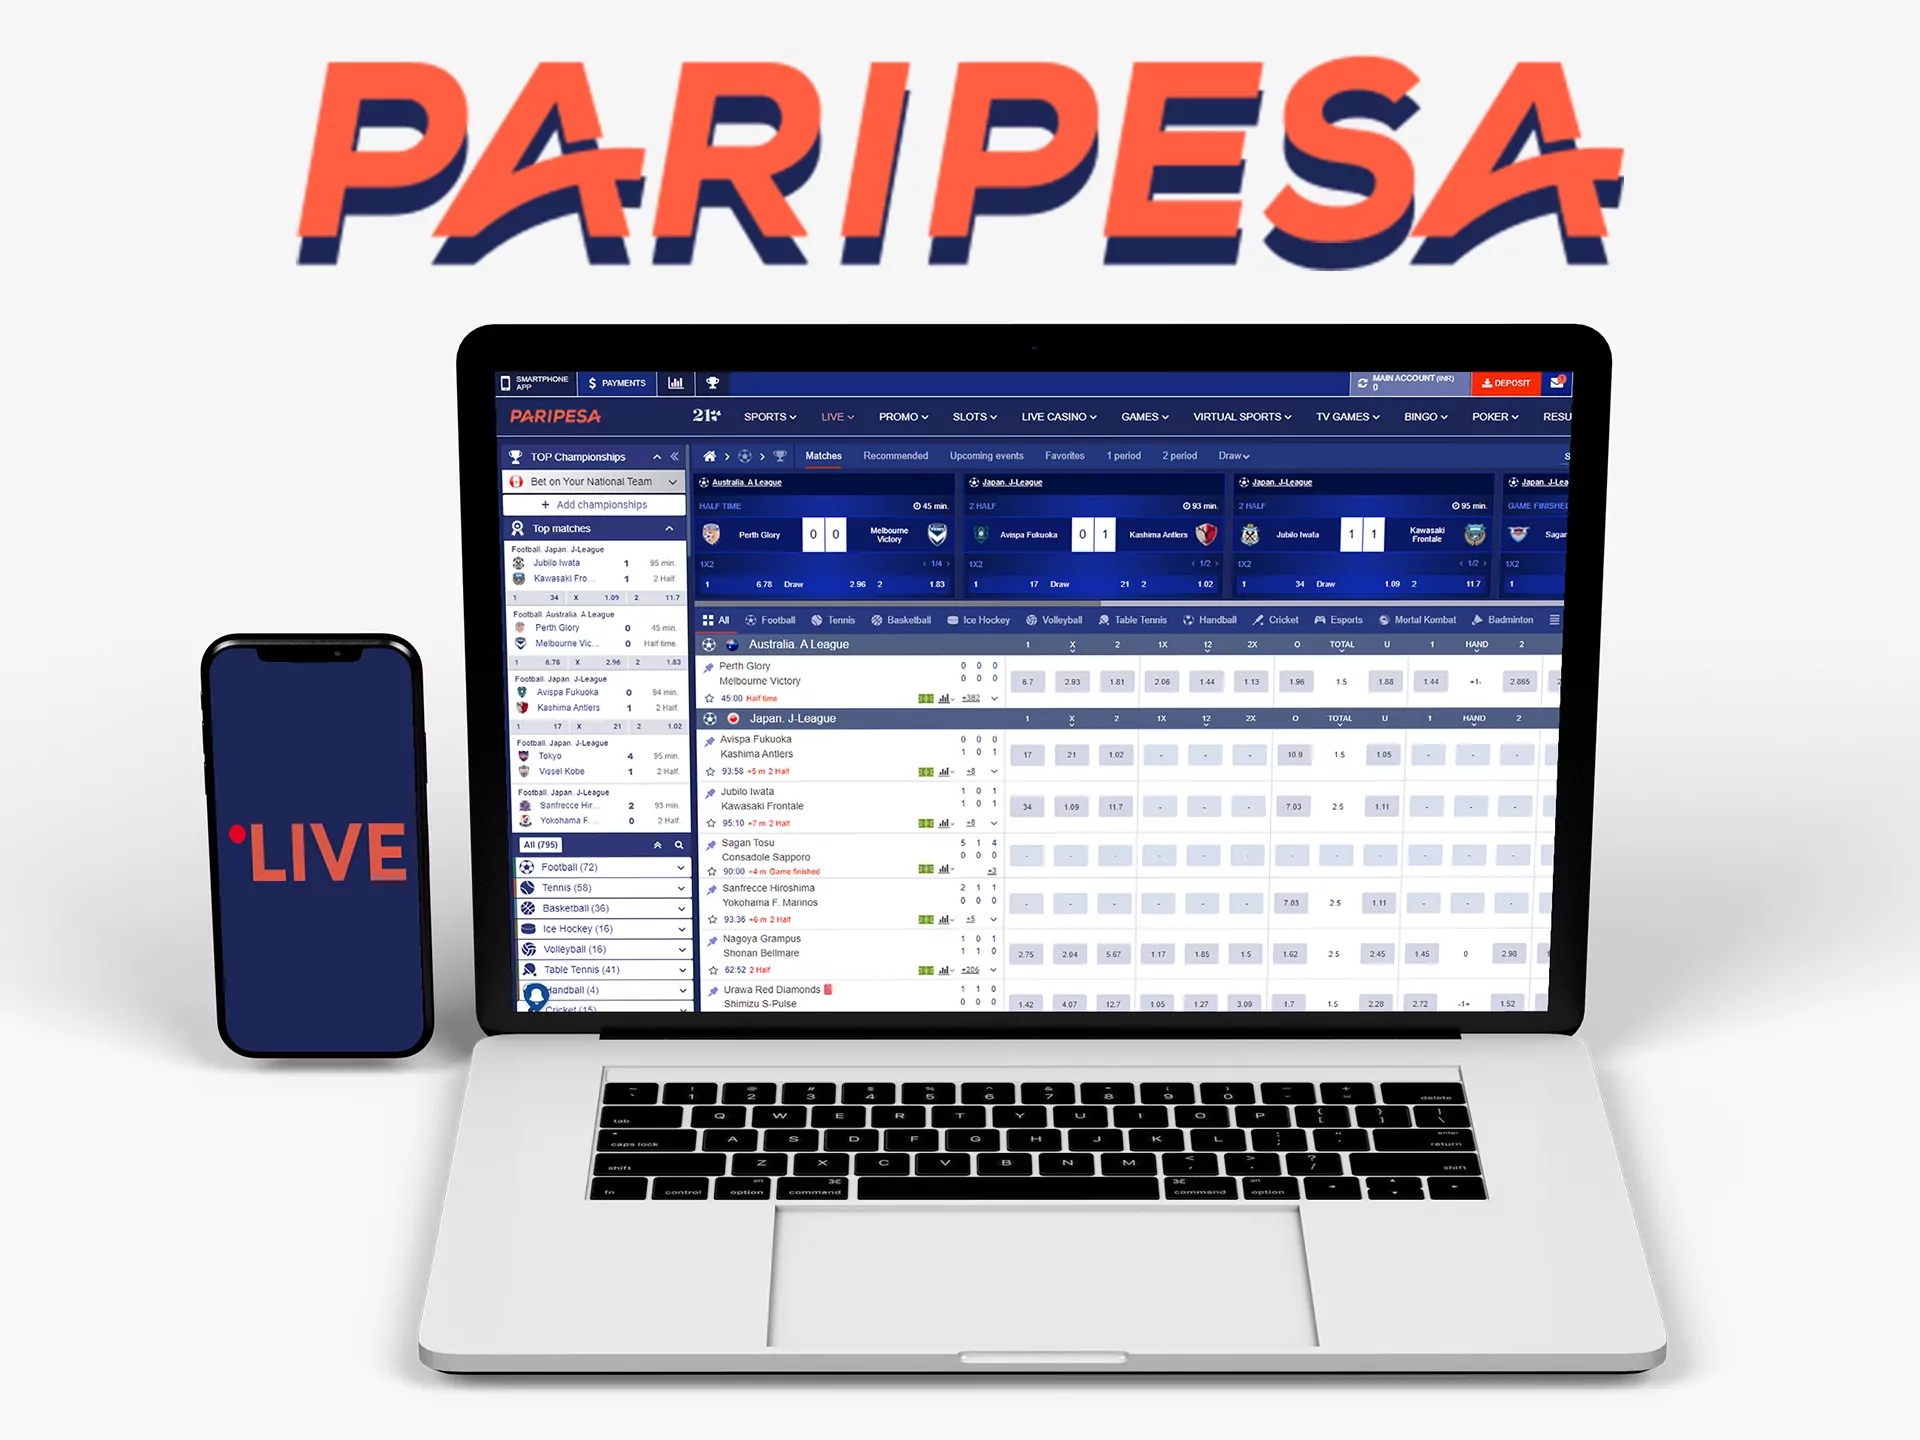 Bet in live format at Paripesa.